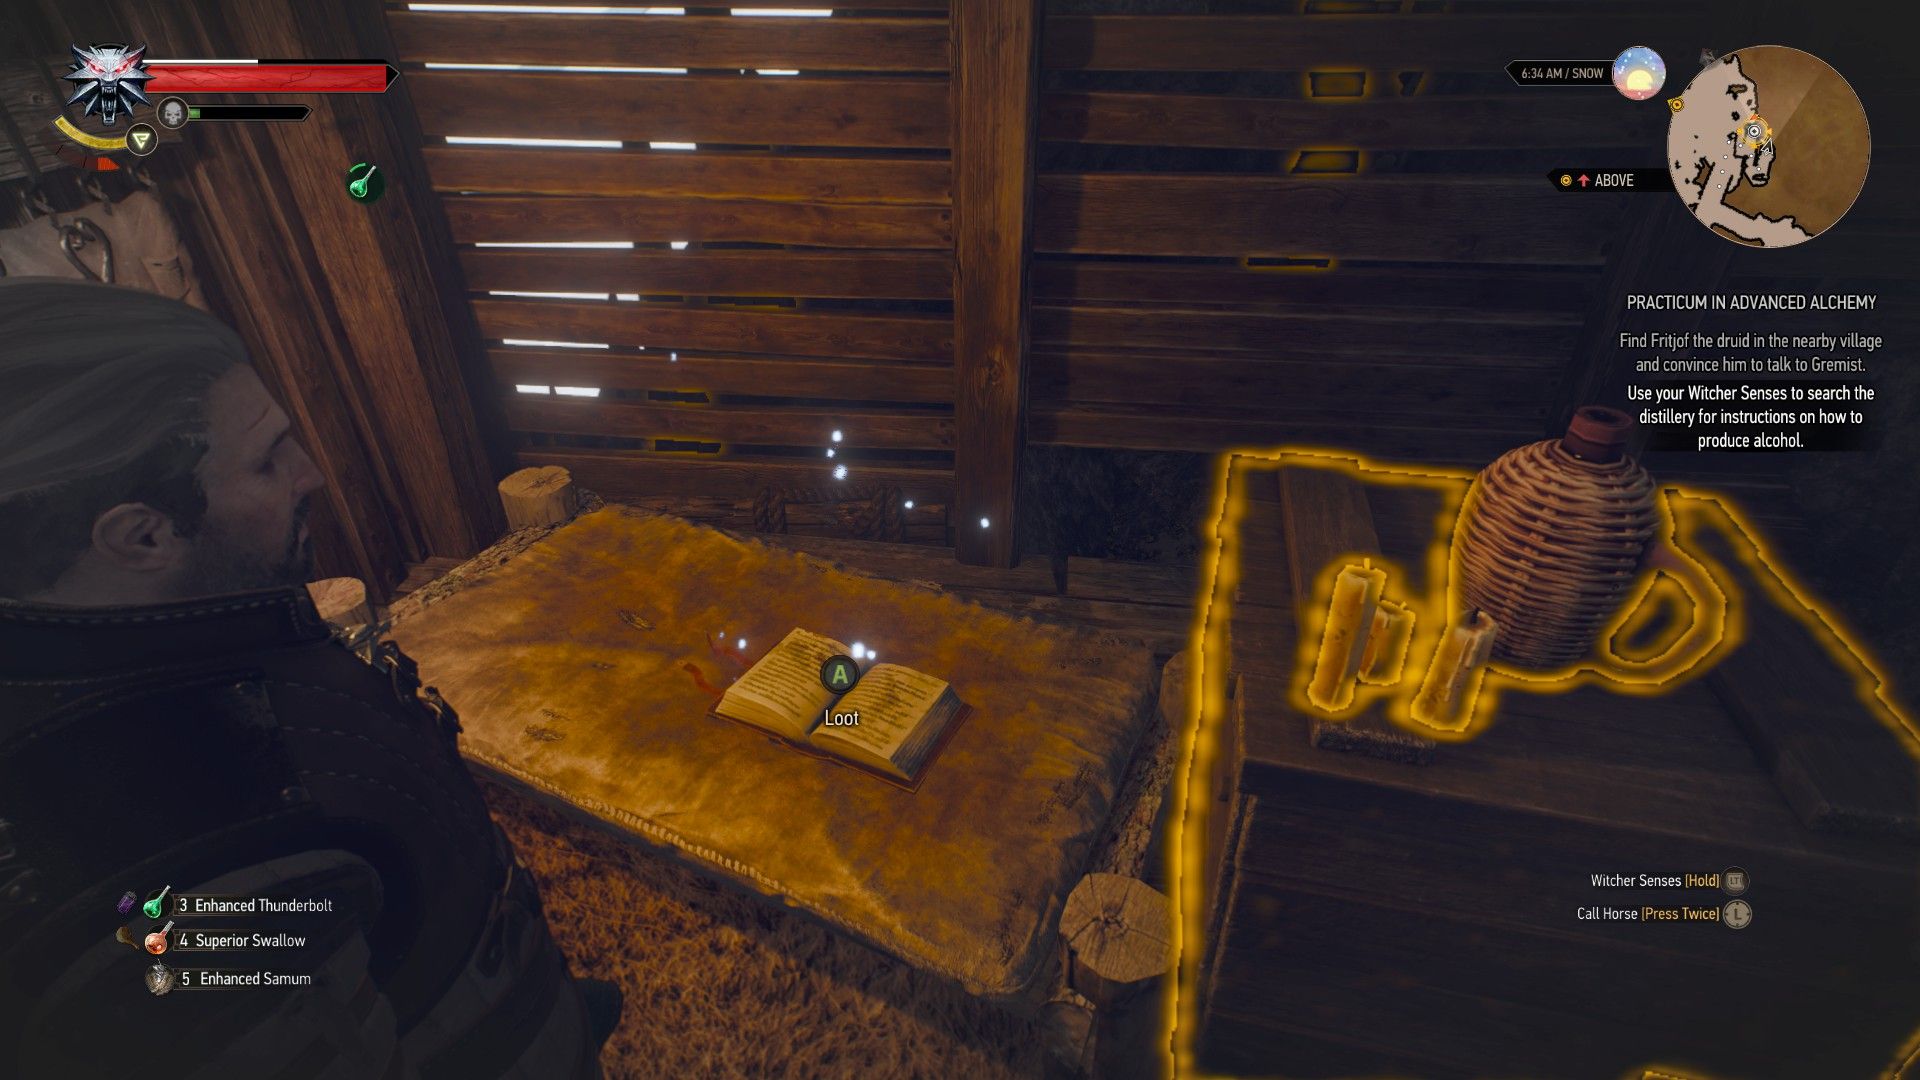 A screenshot of Geralt standing in an abandoned room with a book on his bed.